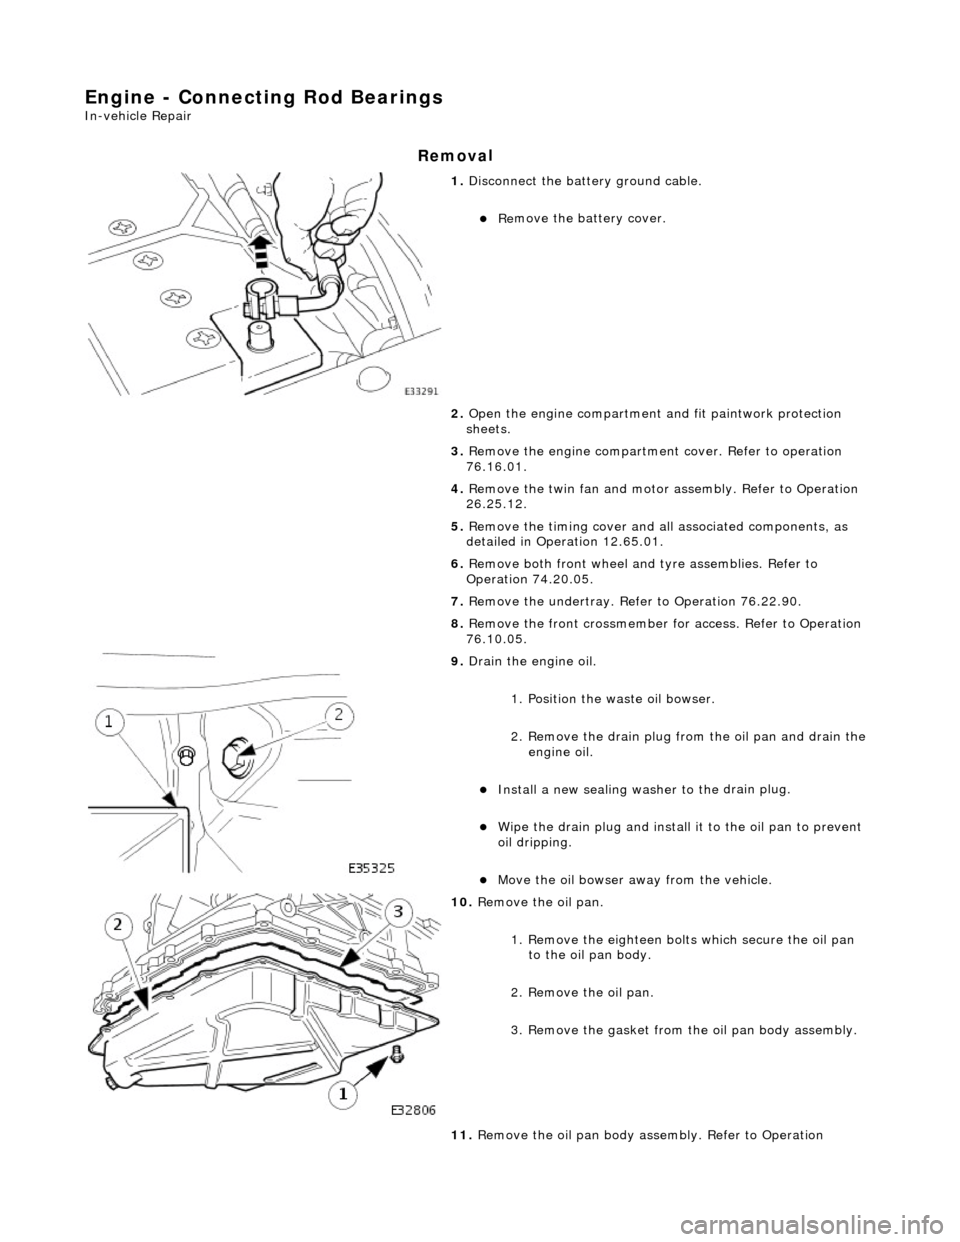 JAGUAR X308 1998 2.G Workshop Manual Engine - Connecting Rod Bearings 
In-vehic
 le Repair 
Remov
a
 l 
 
1. 
Disc
 onnect the batt
ery ground cable. 
Re
 move the battery cover.  
2.  Open the engine compartment and fit paintwork pro